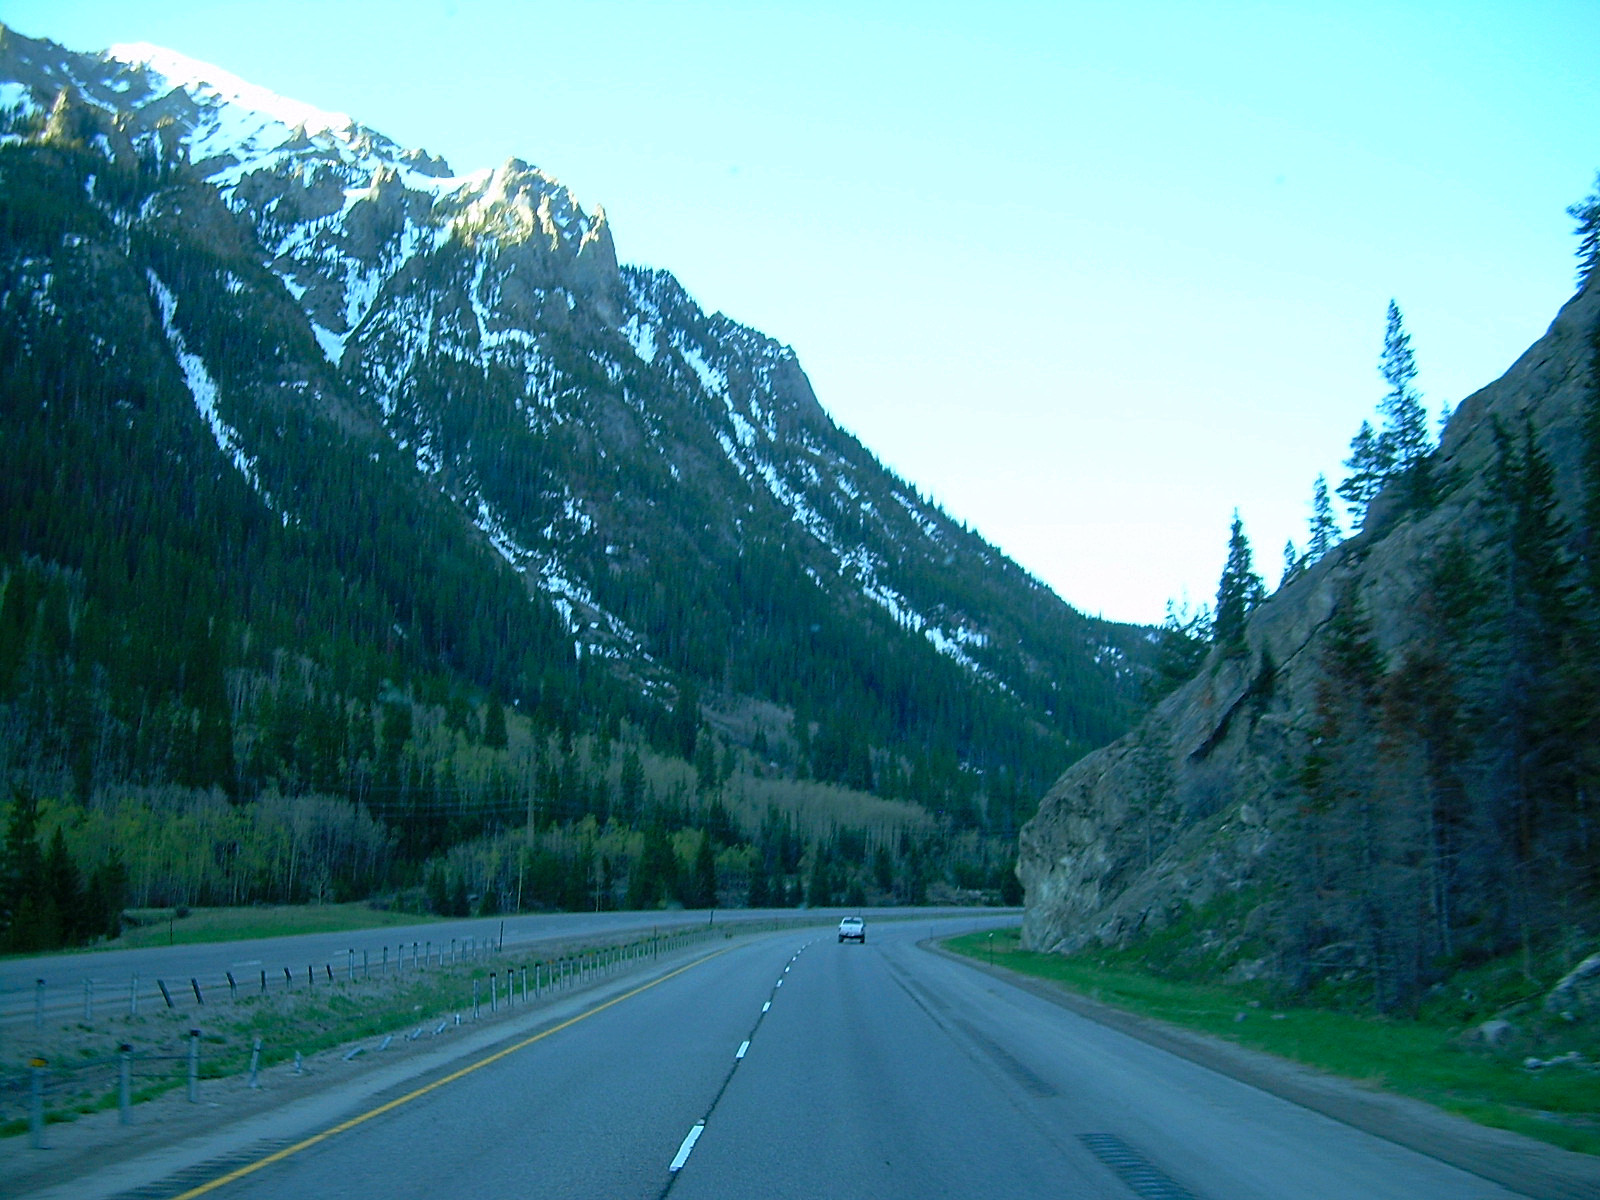  Outside the Eisenhower Tunnel exit, in Colarado, USA 